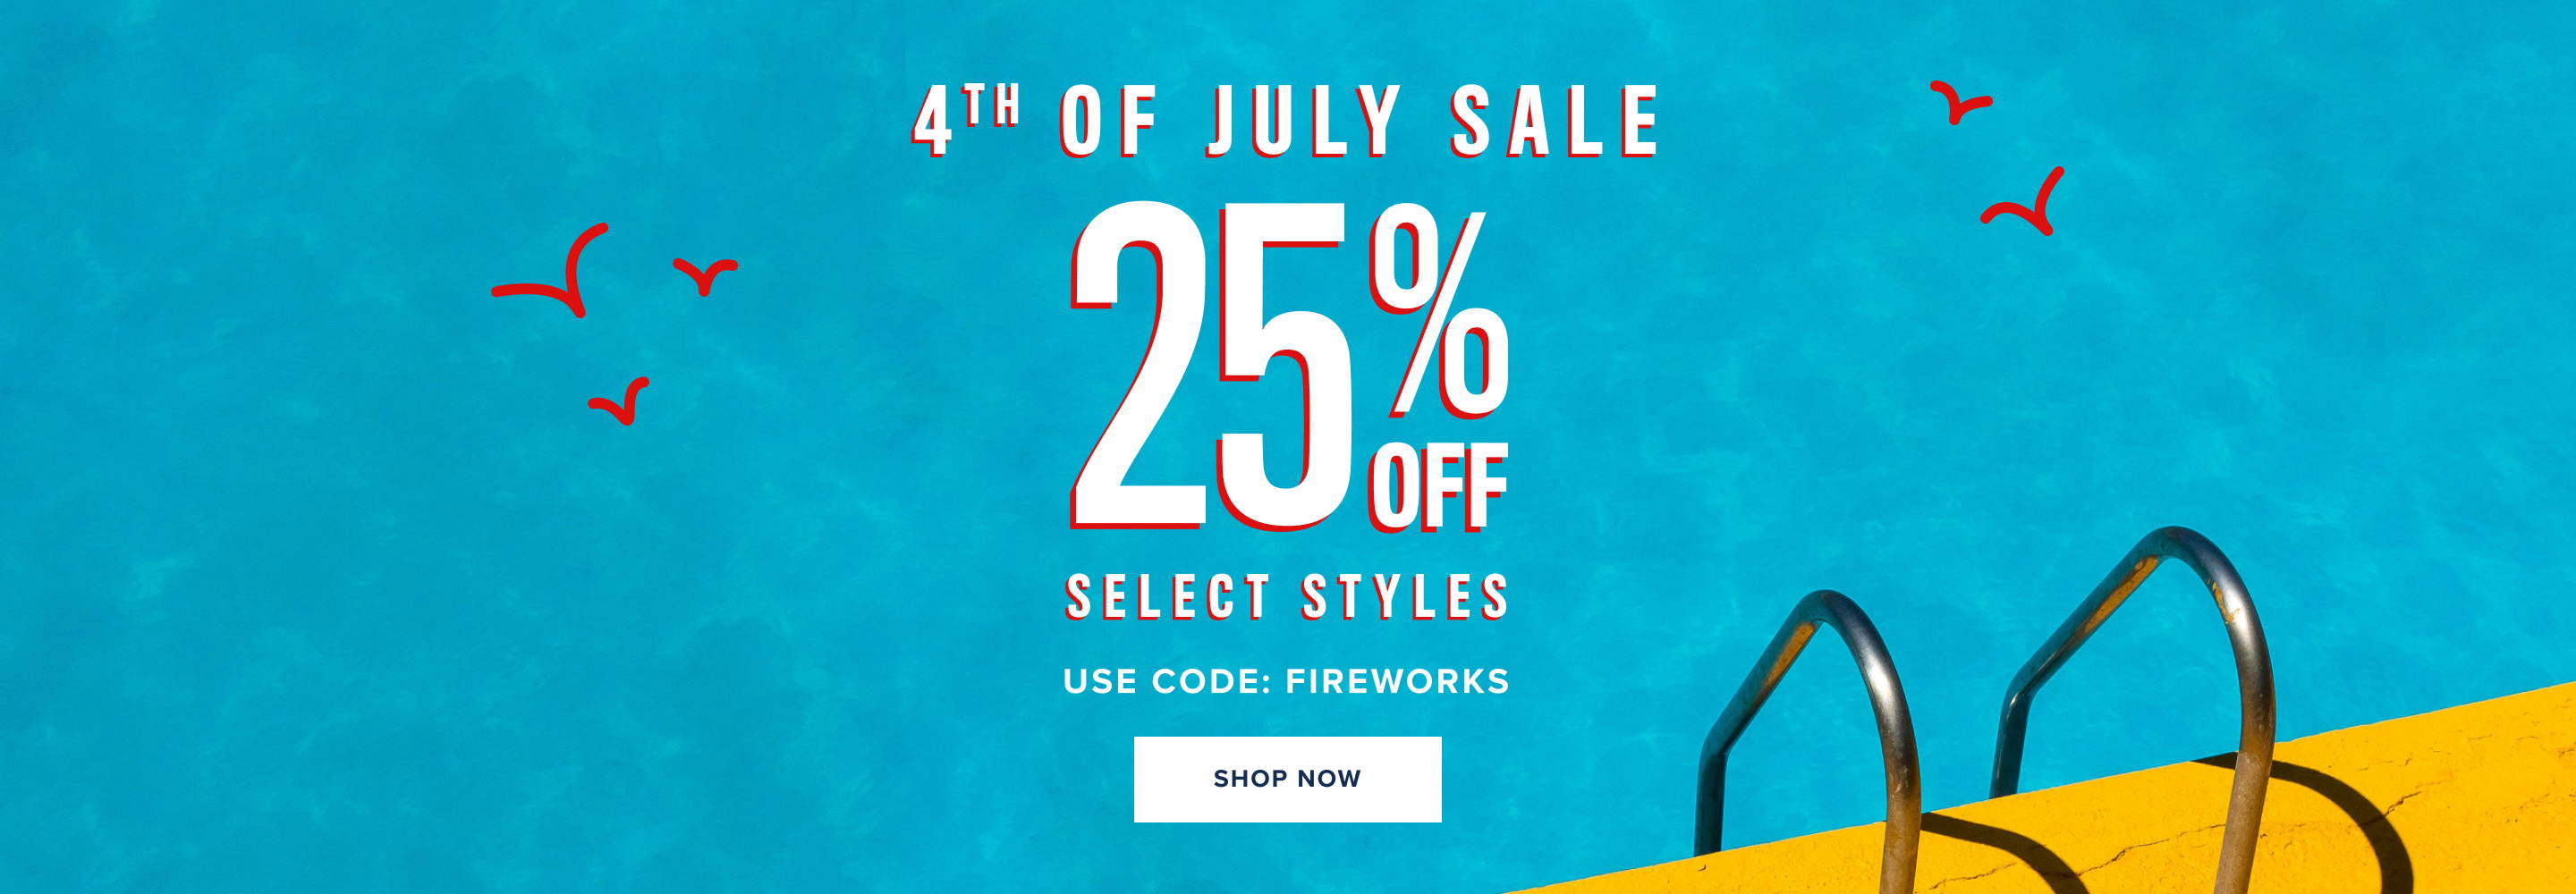 4th of July sale 25% off select styles. Use code: FIREWORKS